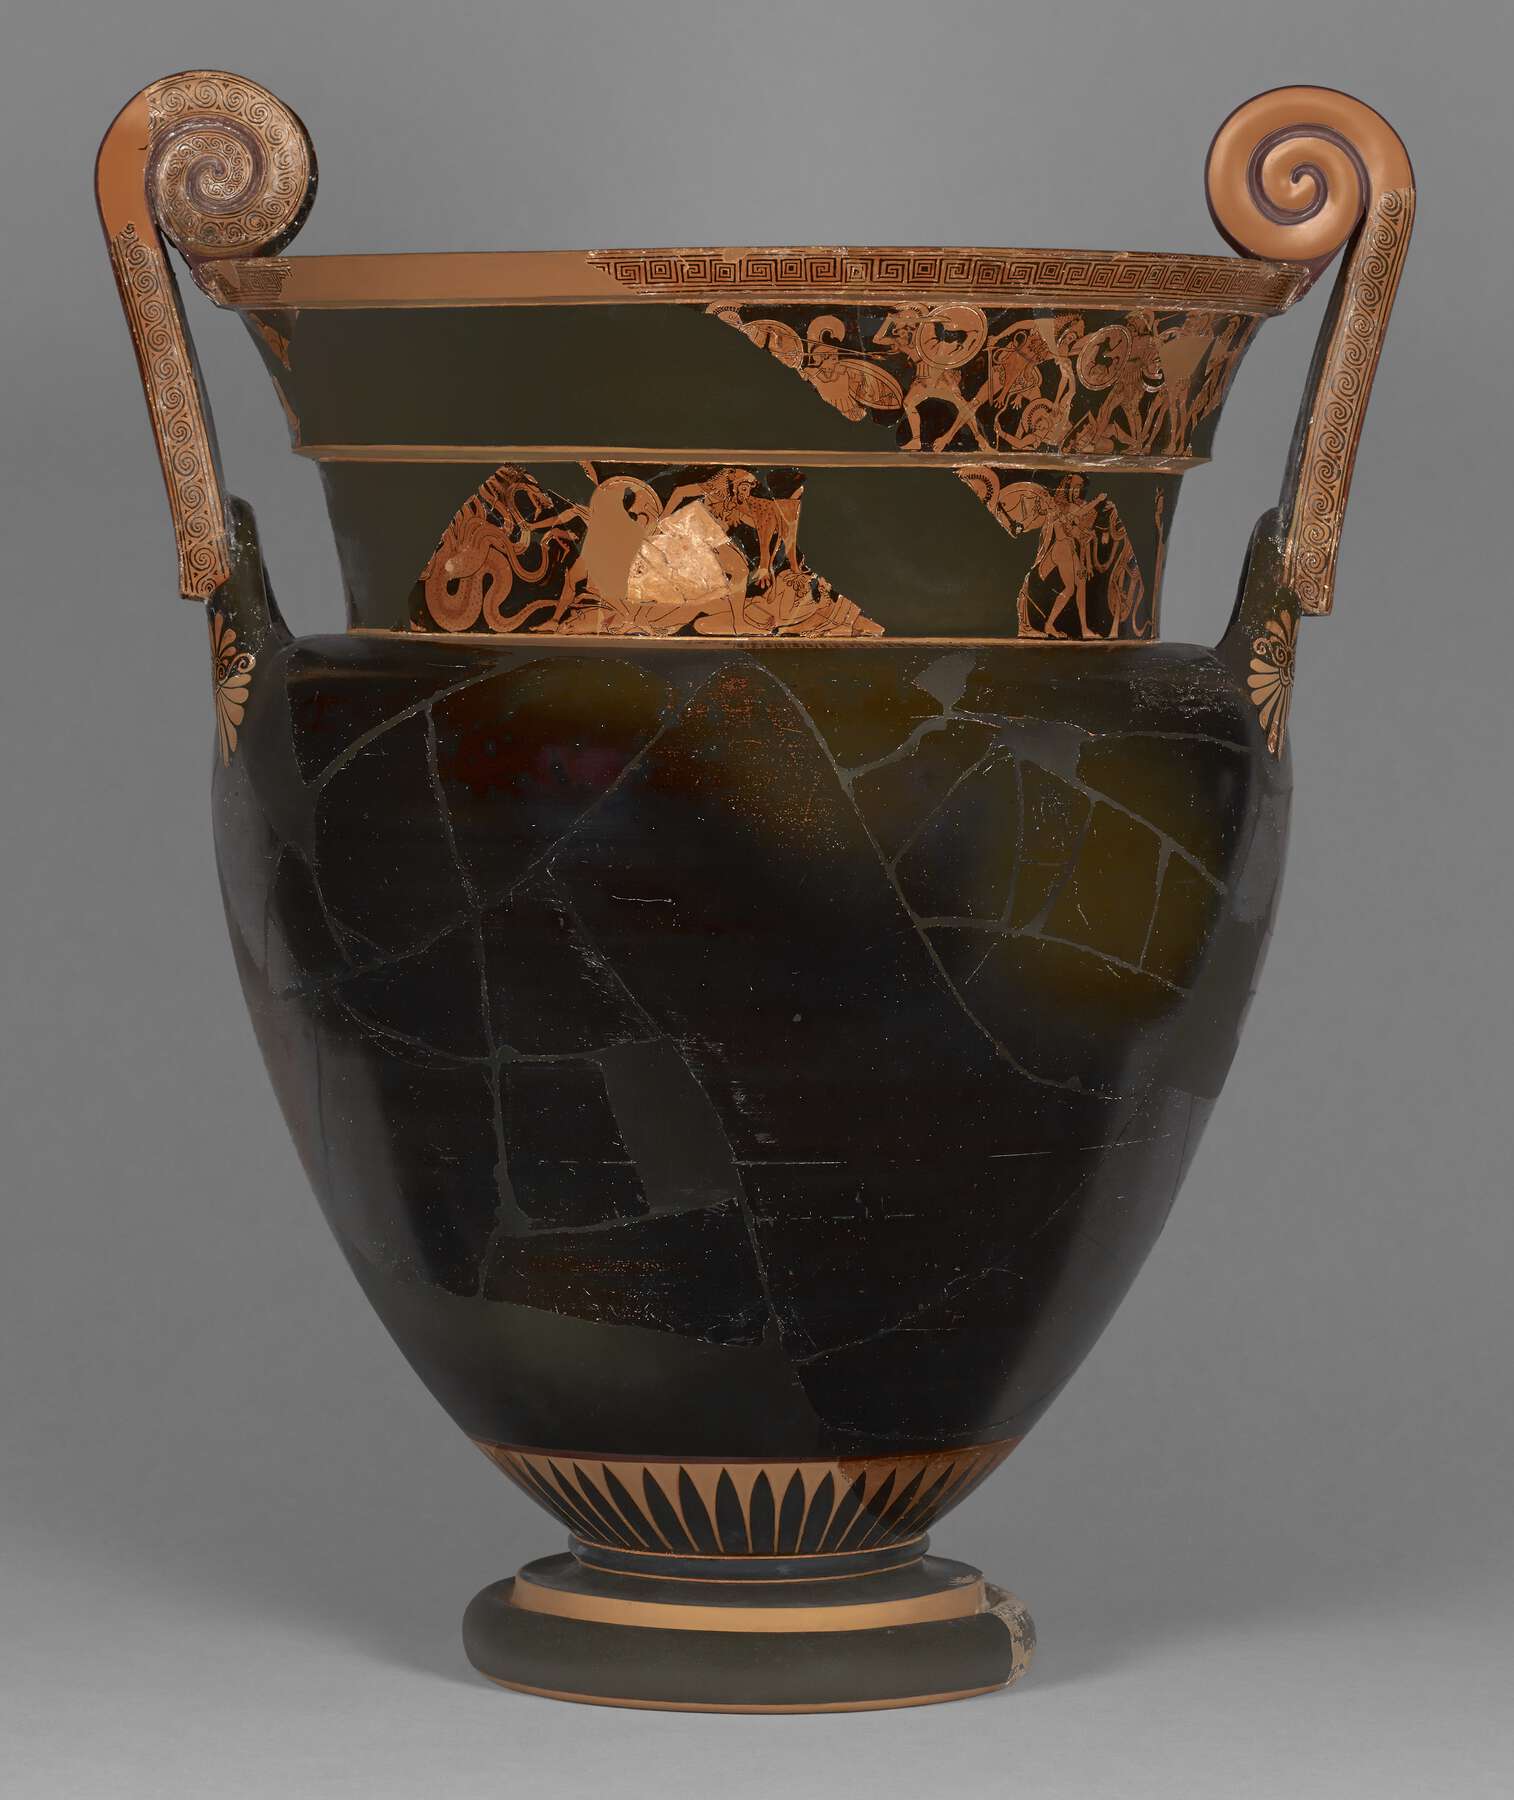 View of the pre-conservation vase with a black body and some decoration around the neck